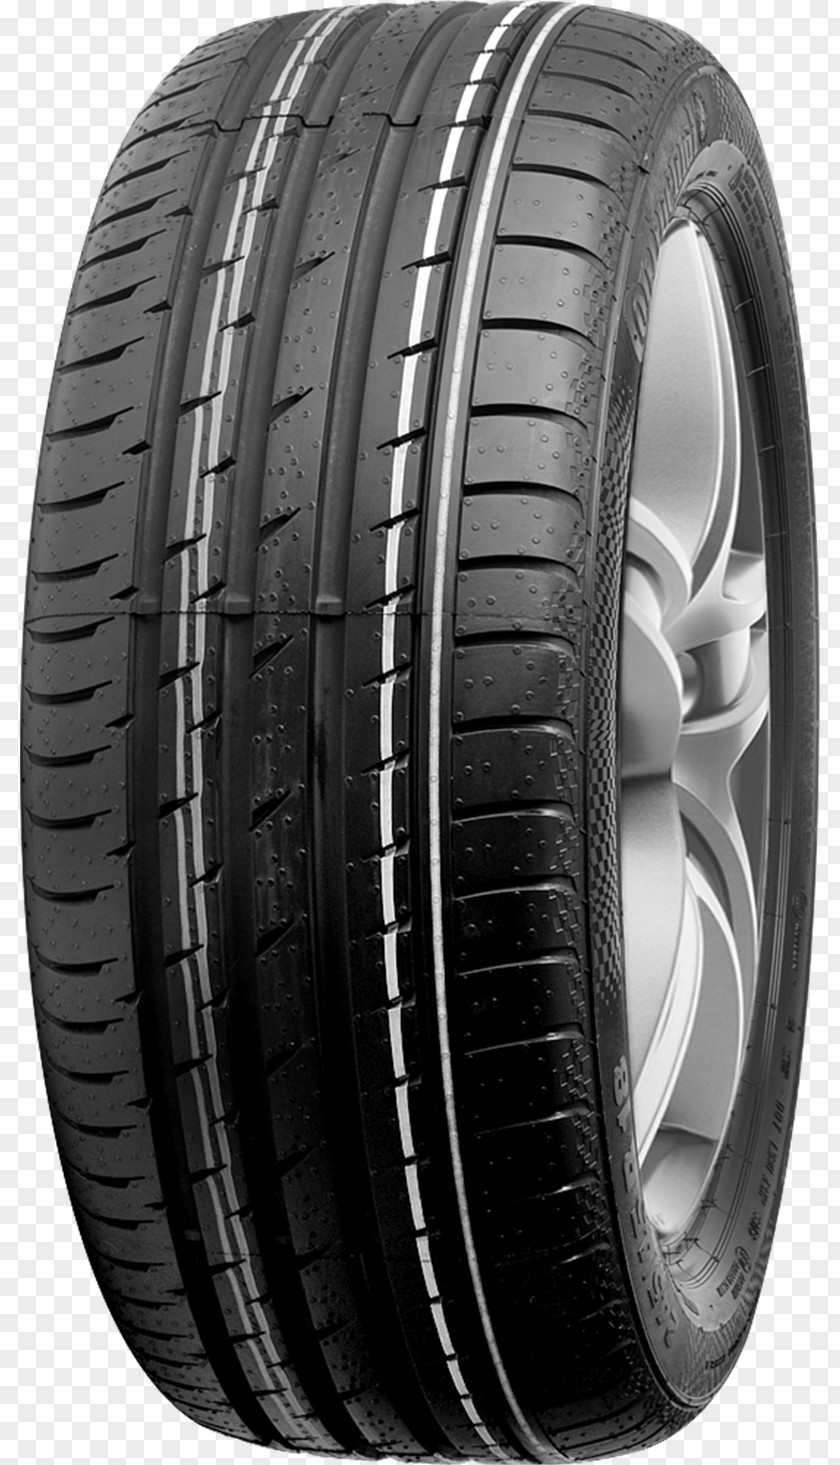 Tire Continental AG 5 Oponeo.pl Price PNG